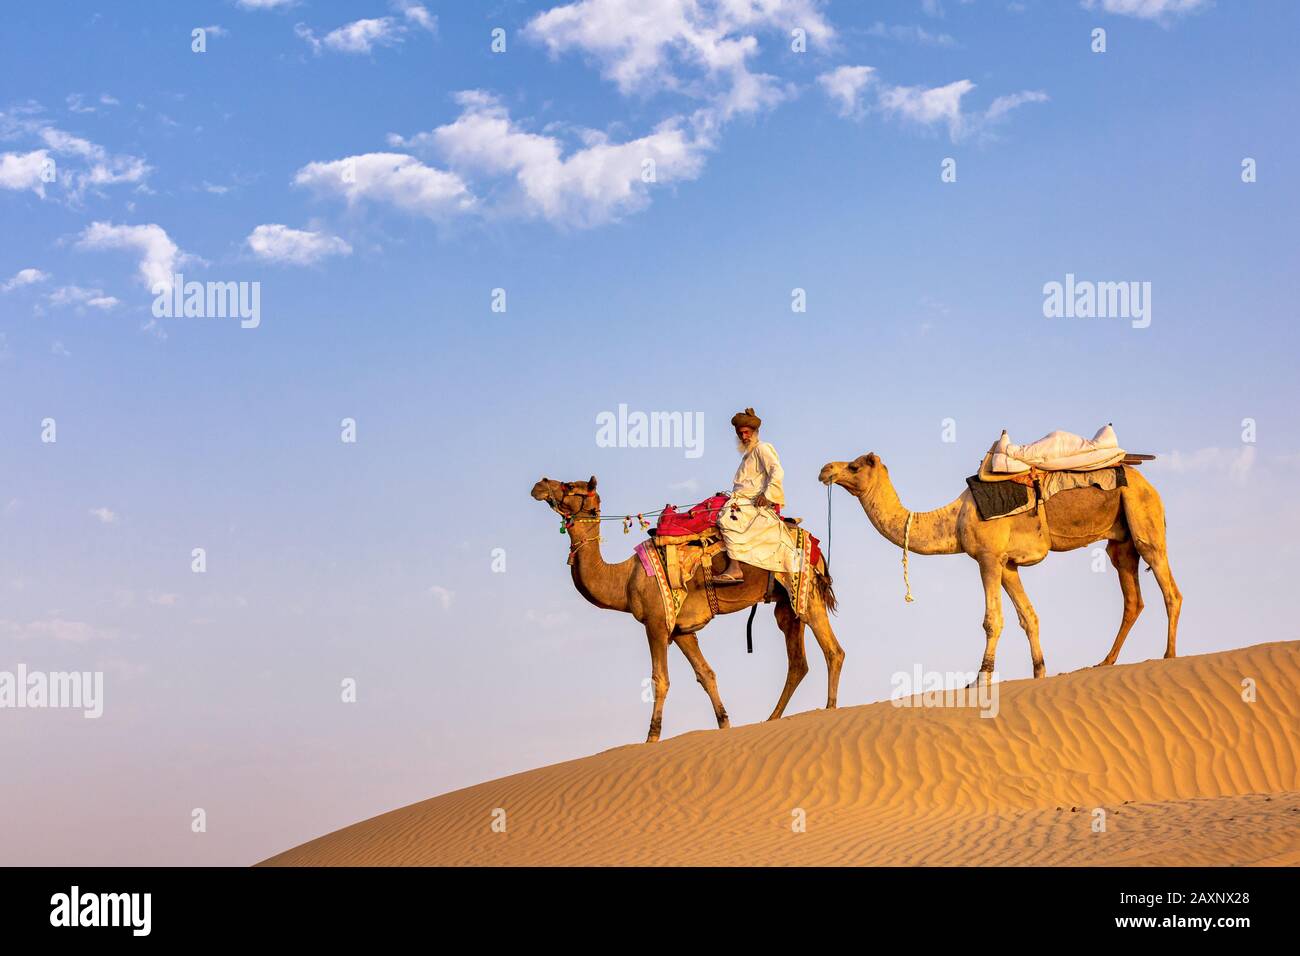 An old man with his camels, Thar desert, Rajasthan, India Stock Photo